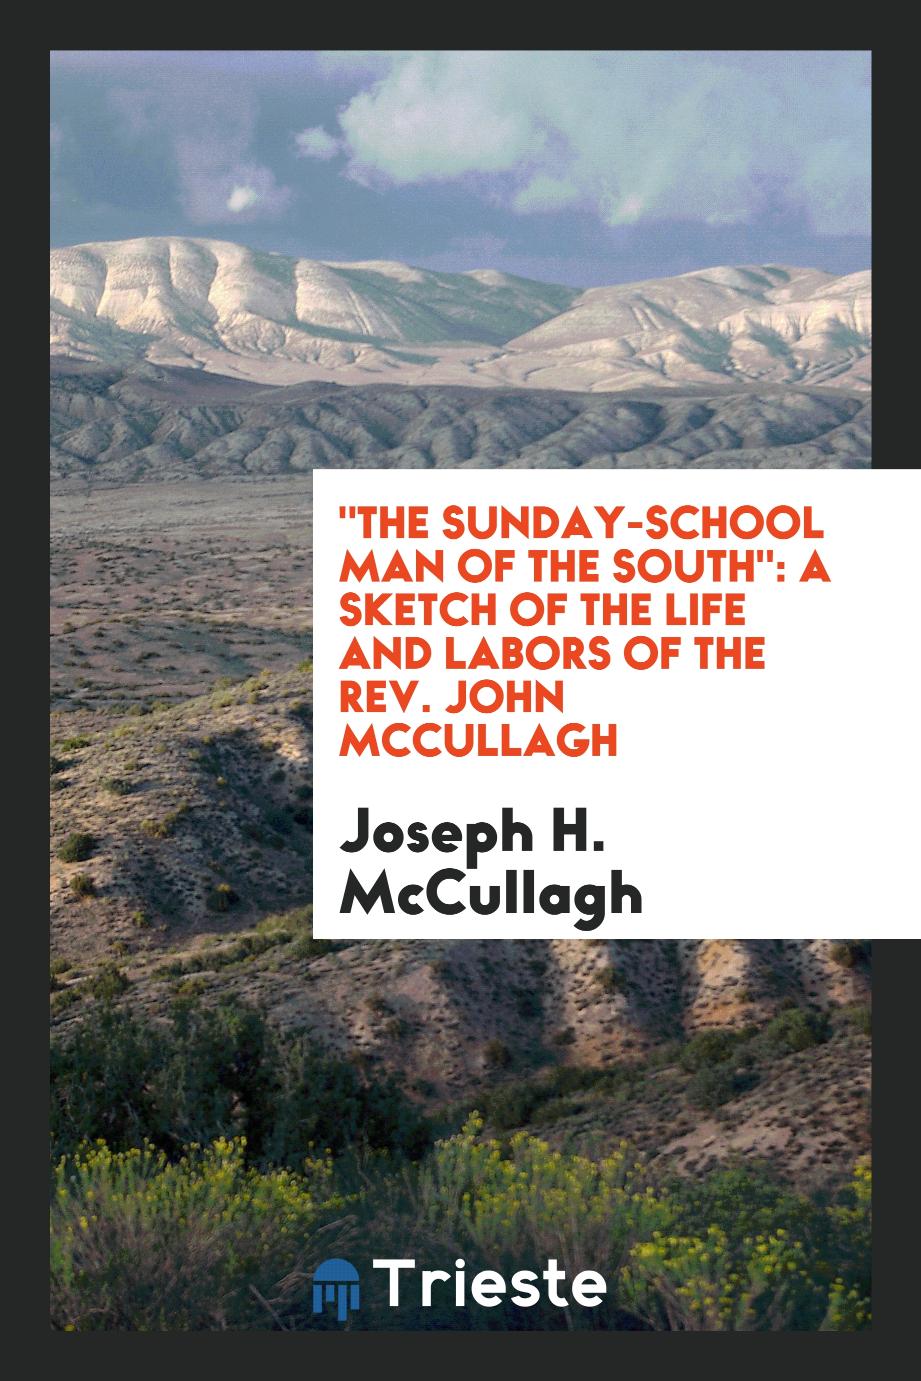 "The Sunday-school man of the South": a sketch of the life and labors of the Rev. John McCullagh